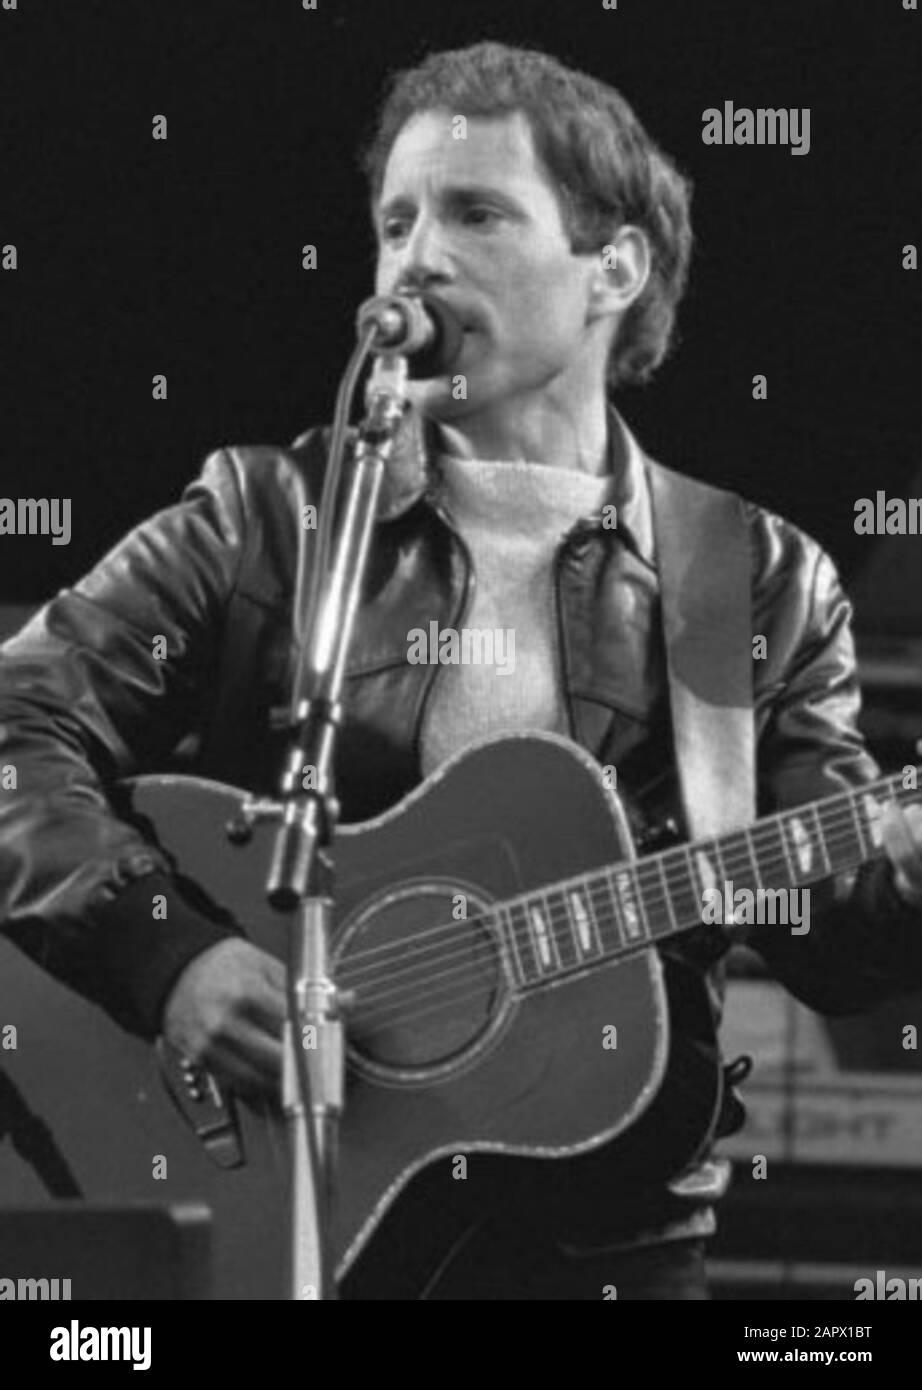 Paul Simon performing at the Feijenoord Stadion, Rotterdam, The Netherlands in 1982.; Stock Photo